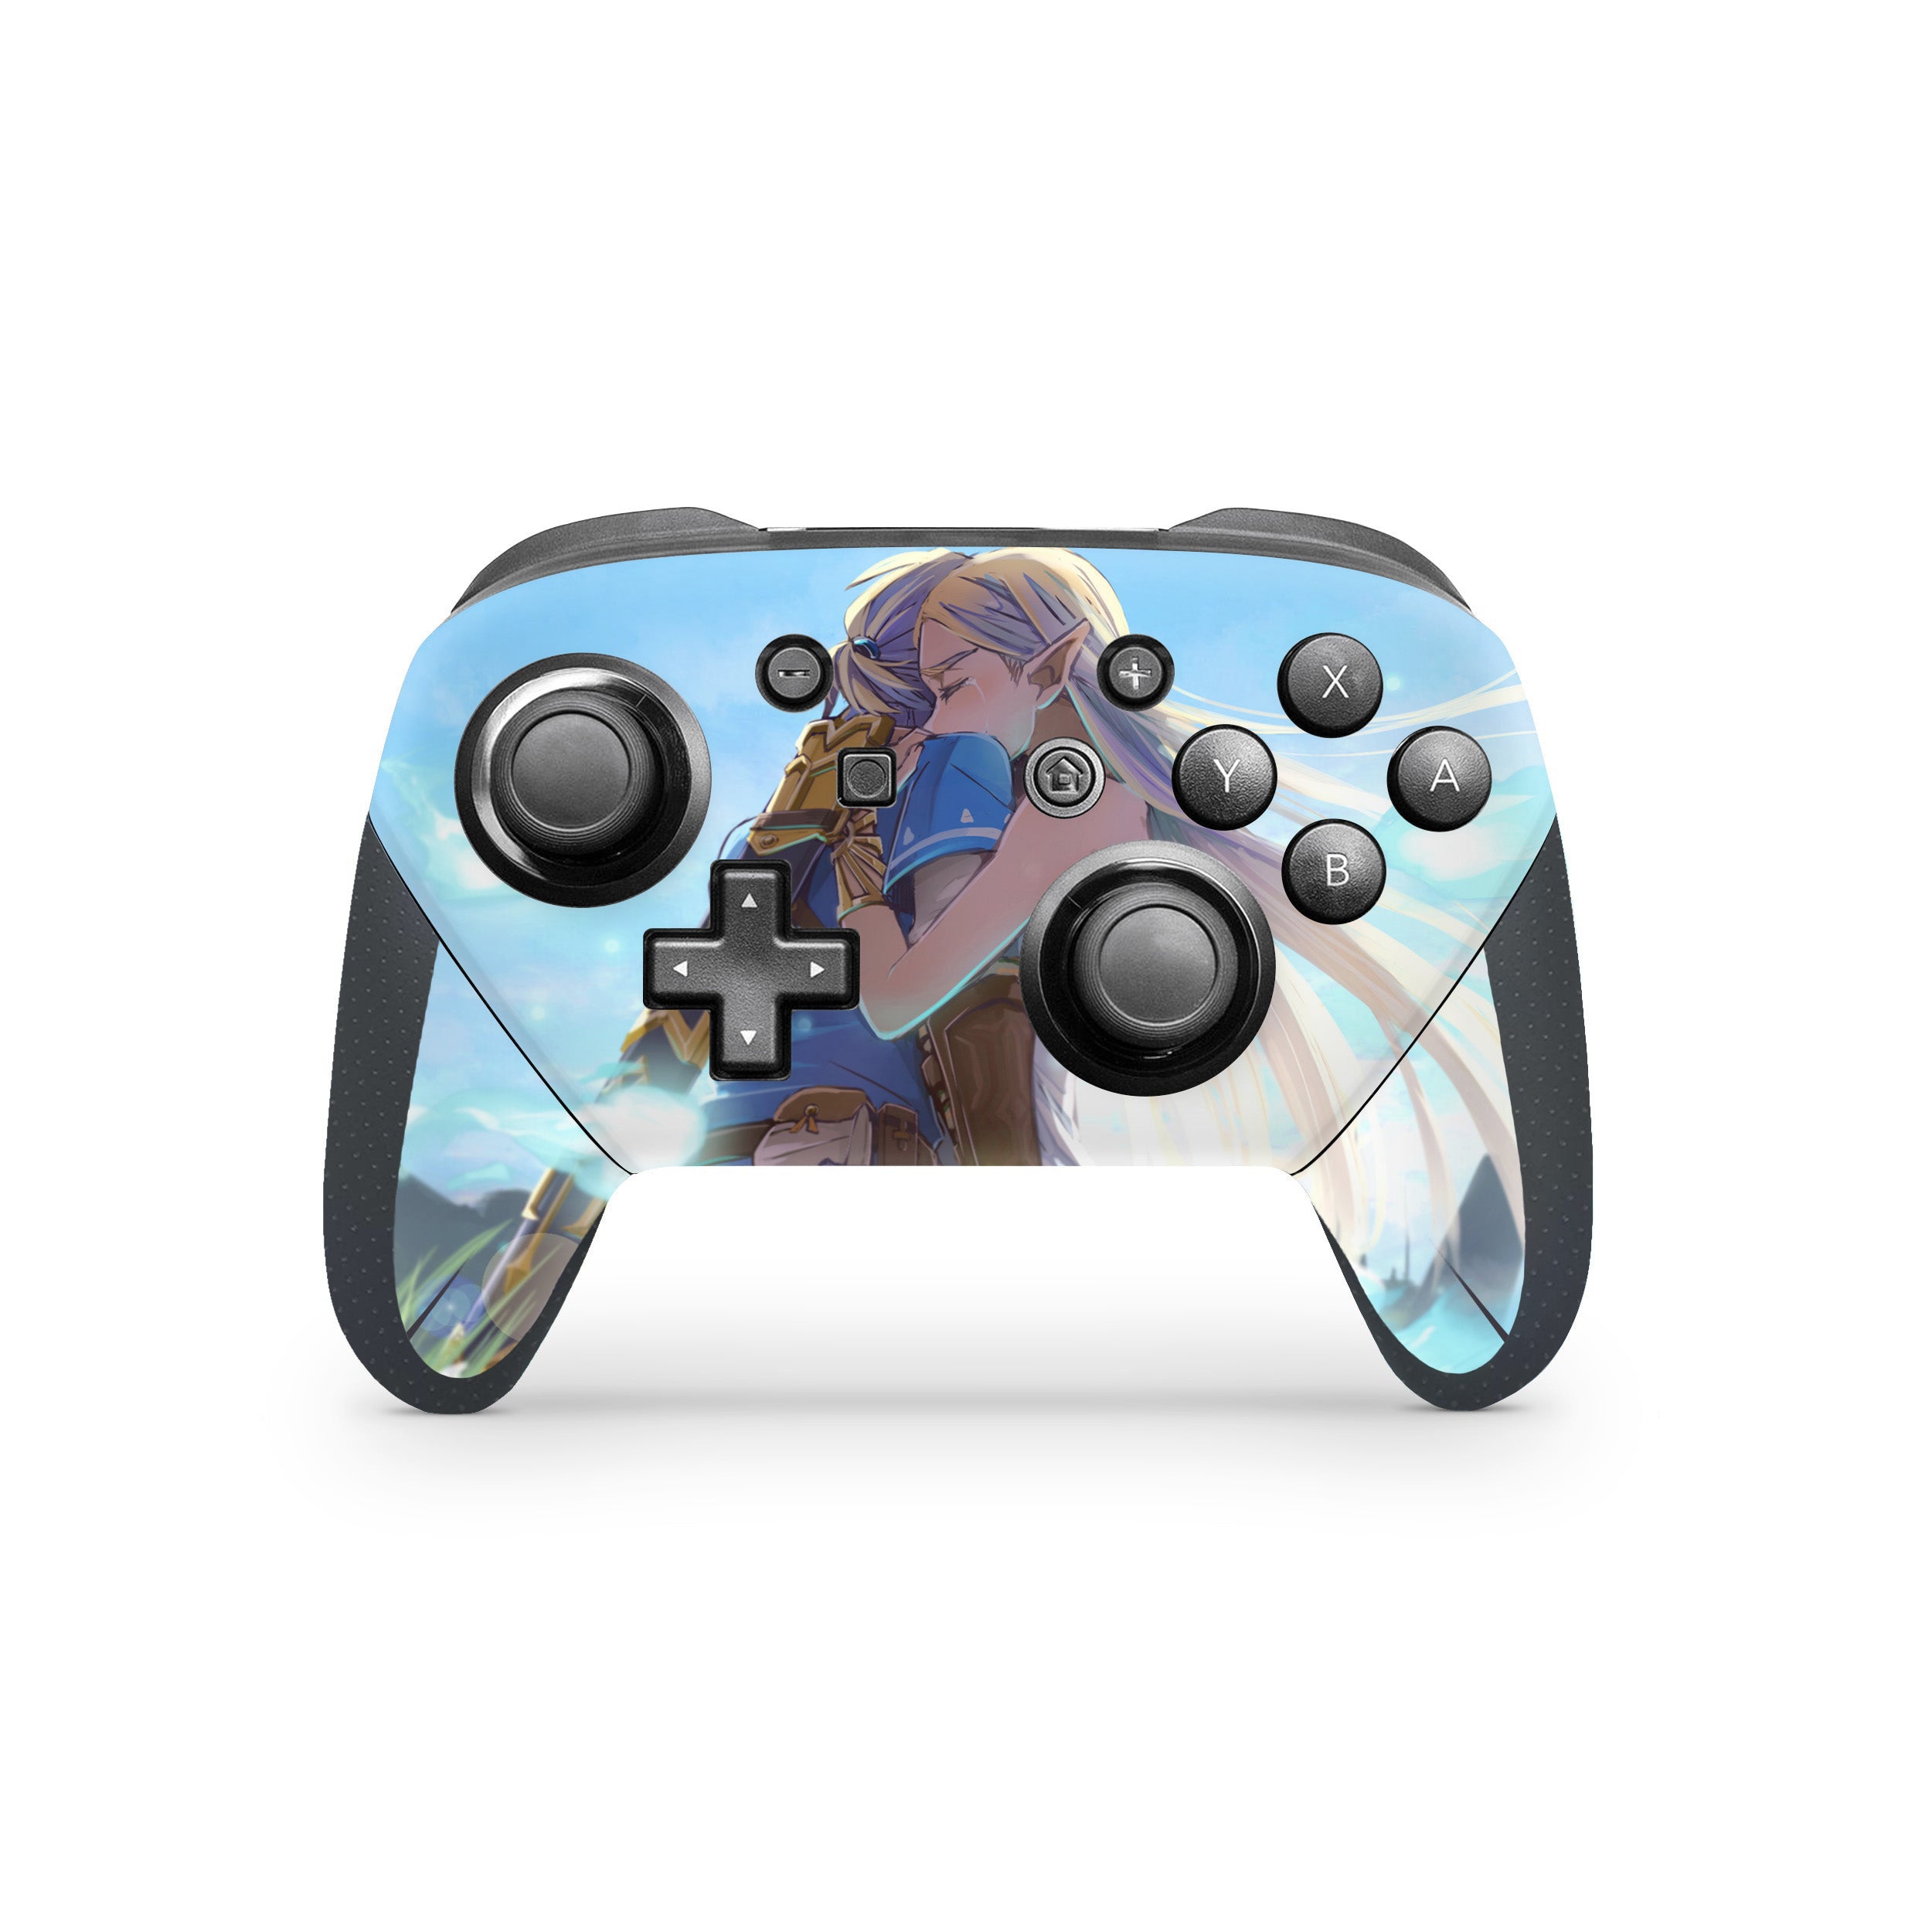 A video game skin featuring a Zelda design for the Switch Pro Controller.